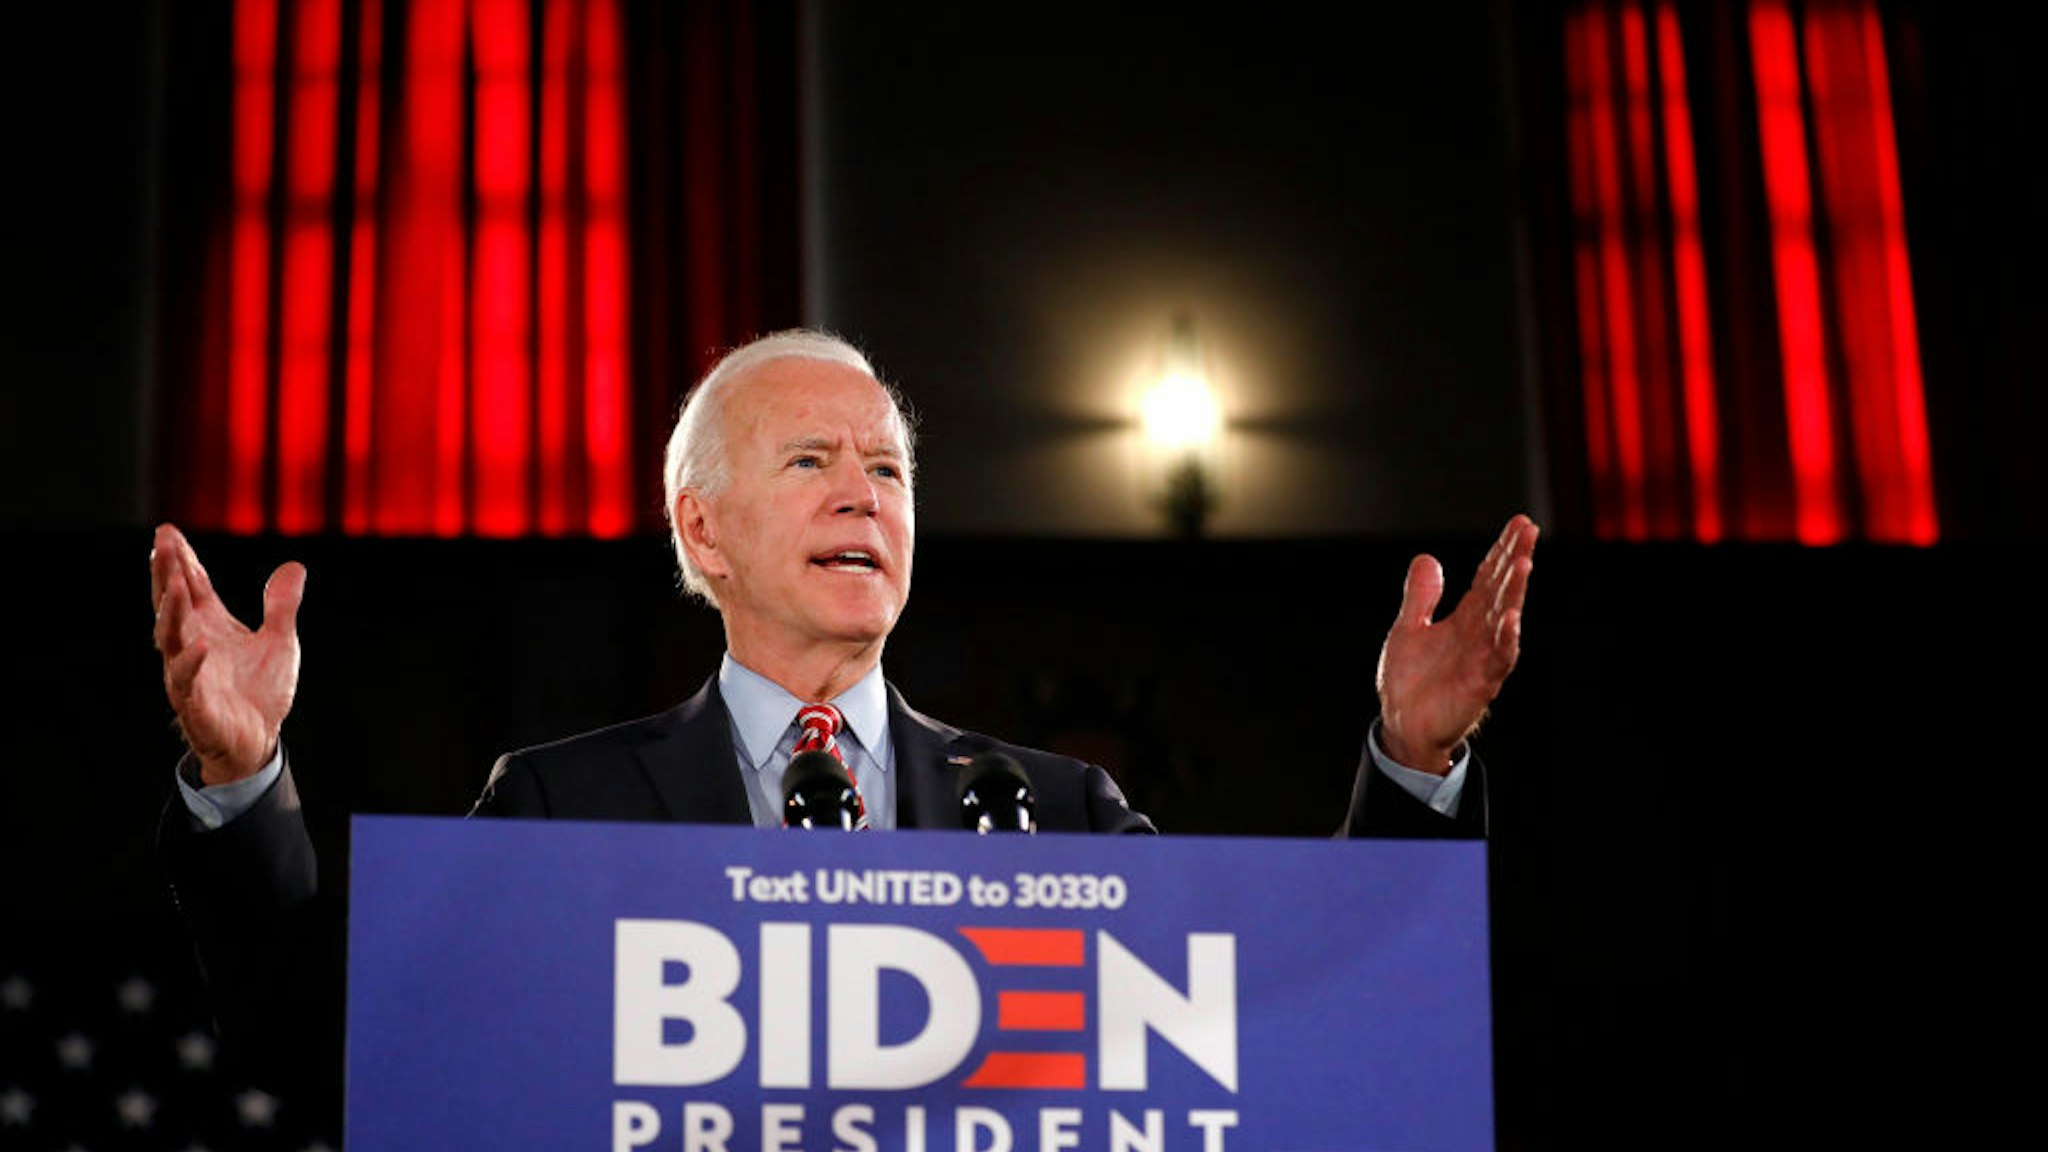 Democratic Presidential candidate Joe Biden lays out his economic policy plan to help rebuild the middle class during a campaign stop at the Scranton Cultural Center on October 23, 2019 in Scranton, Pennsylvania.